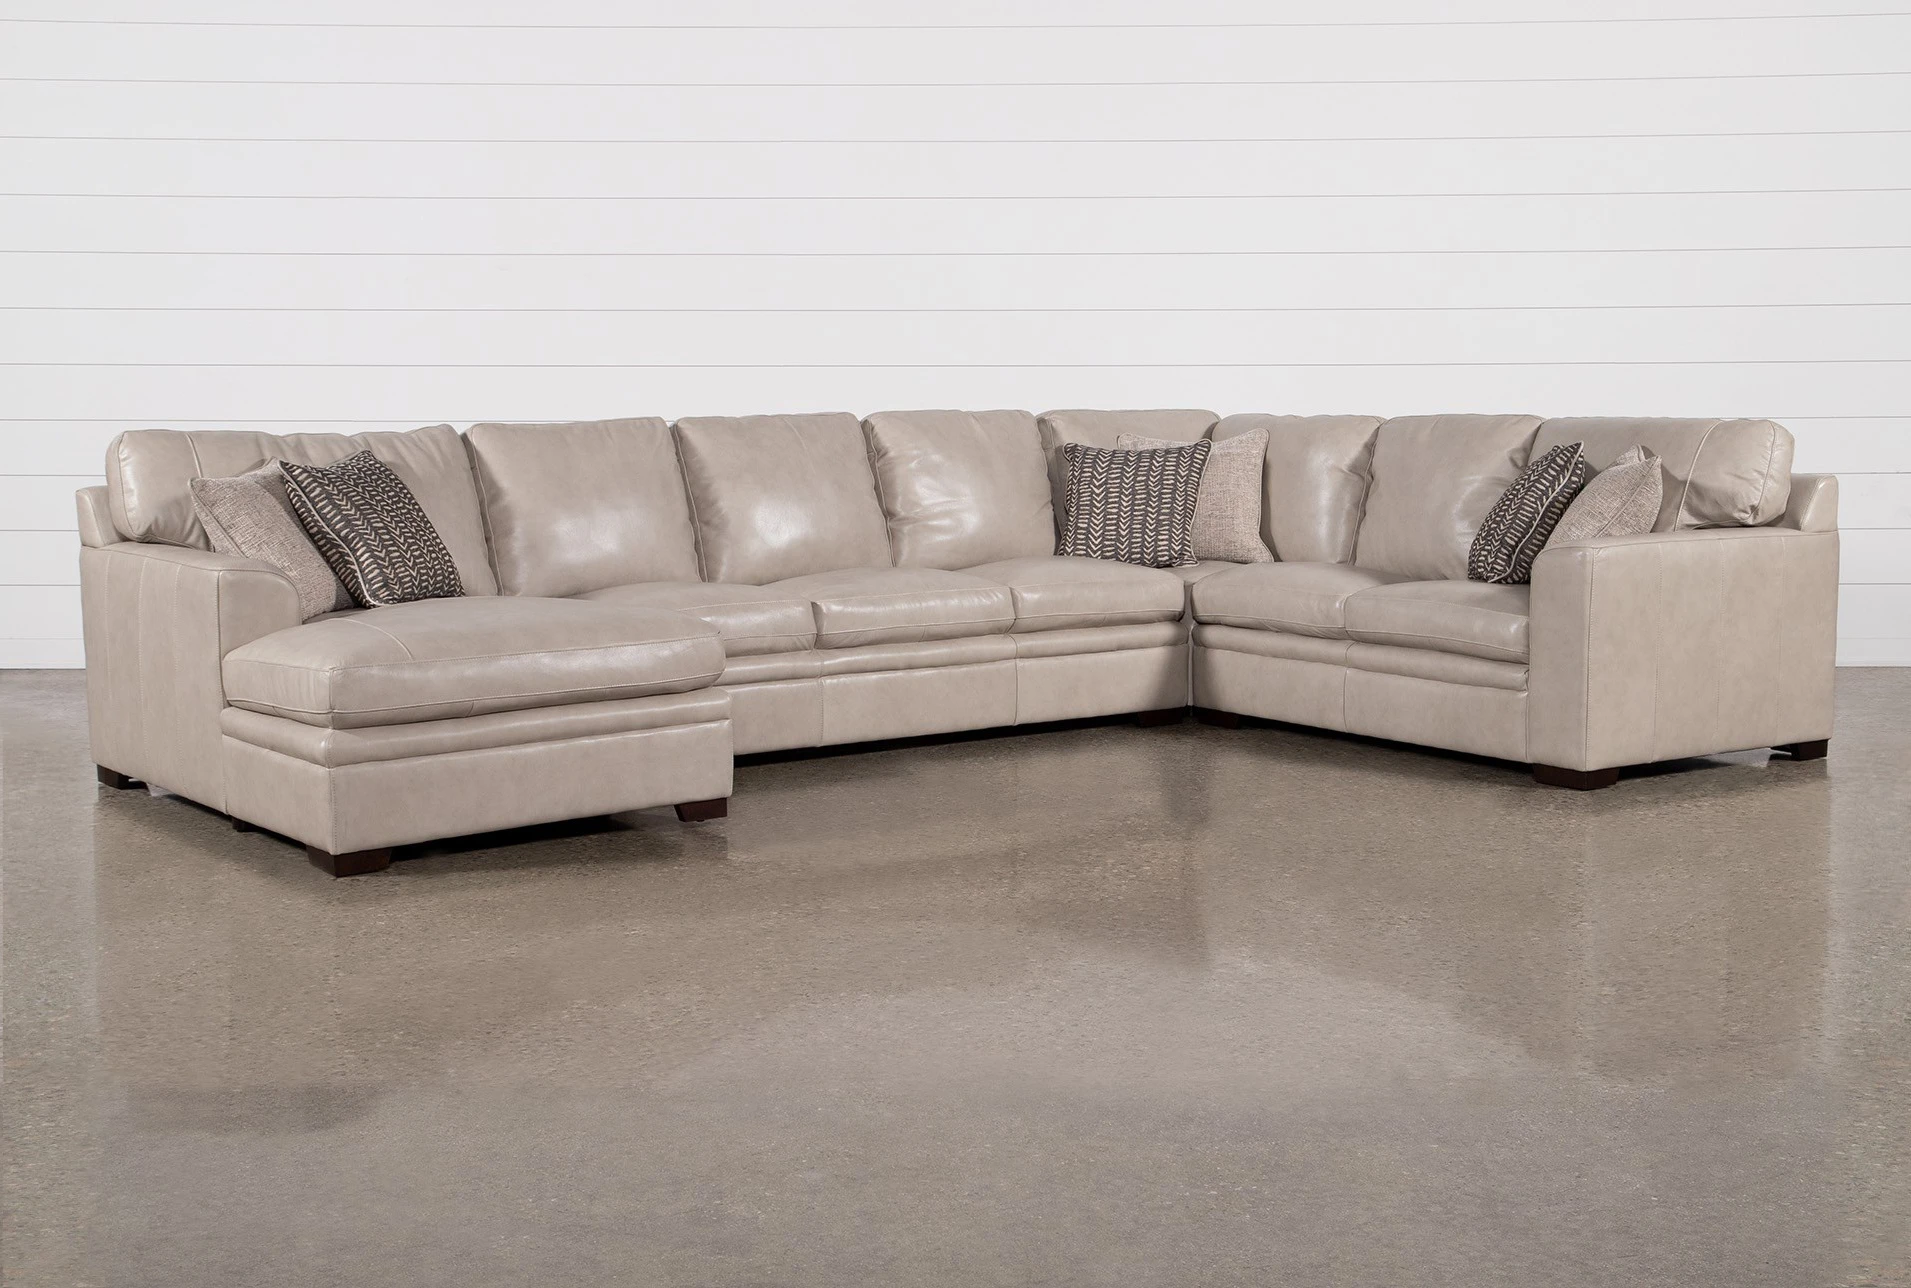 Greer Stone Leather 4 Piece 166, Leather Sectional San Antonio Tx